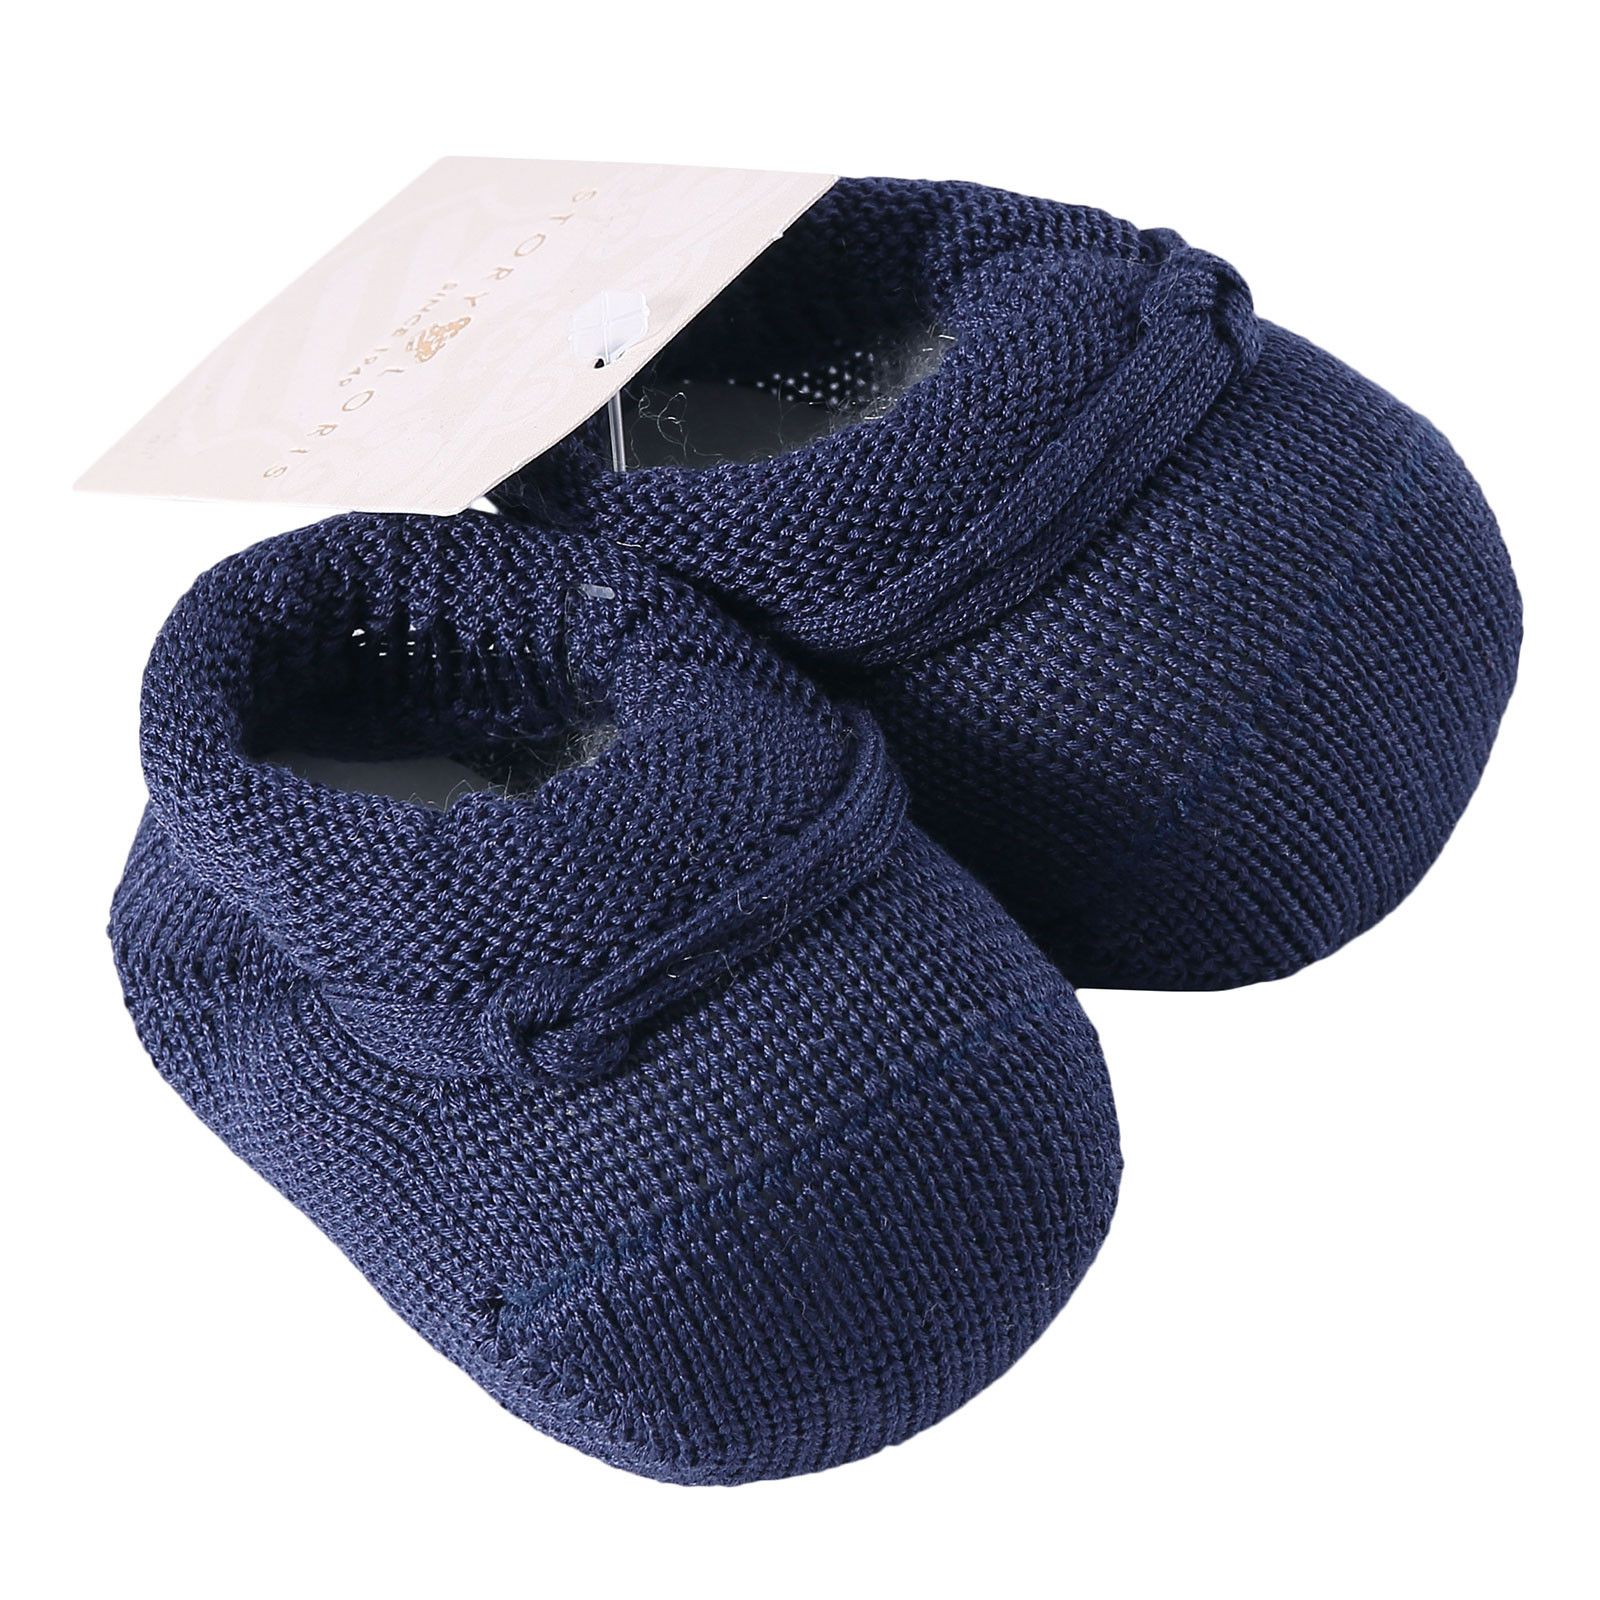 Baby Navy Blue Knitted Cotton Shoes - CÉMAROSE | Children's Fashion Store - 2